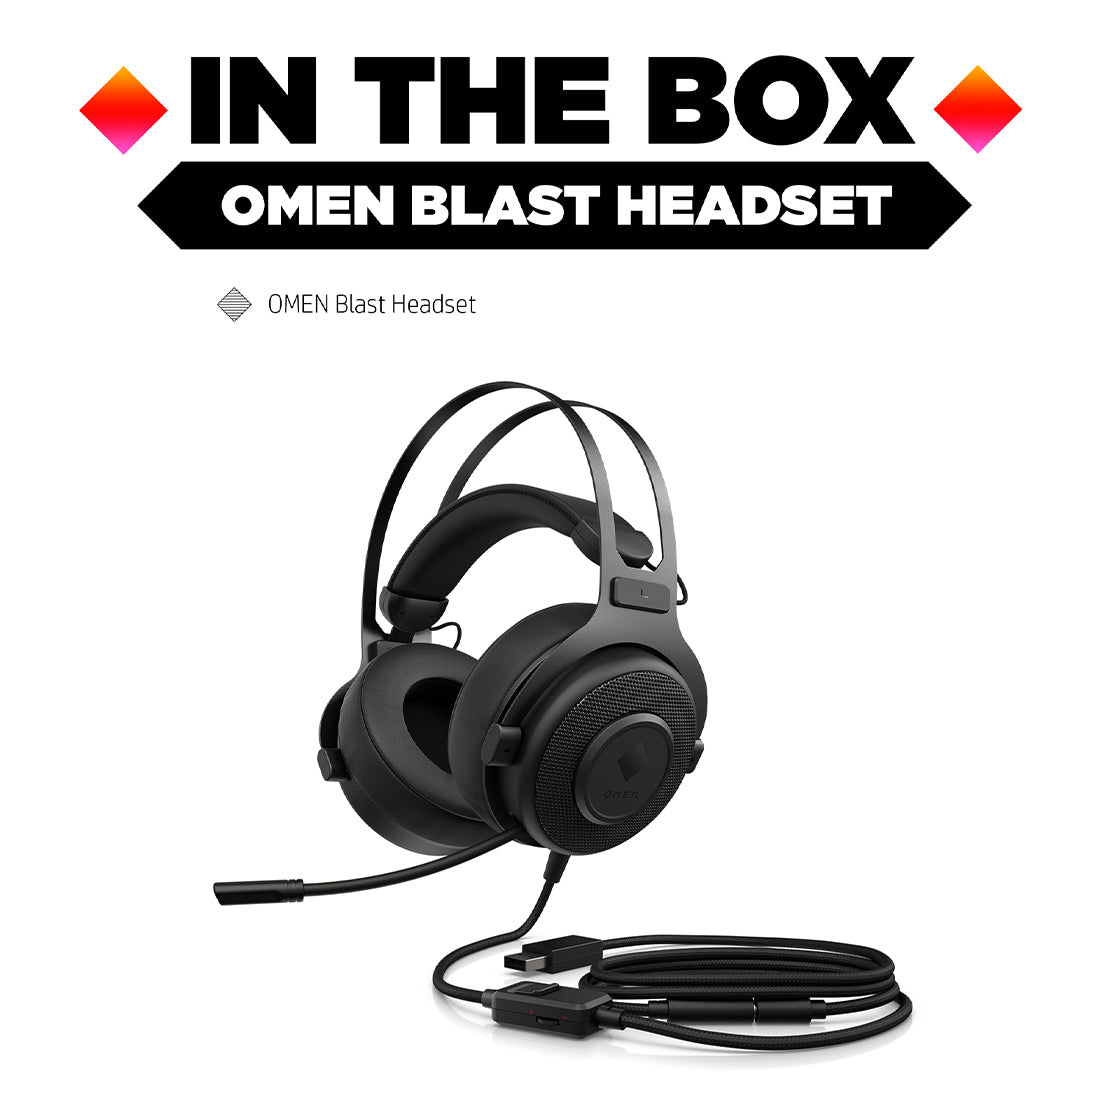 OMEN Blast Headset with 7.1 Surround Sound 24-bit USB DAC and Noise Cancelling Mic